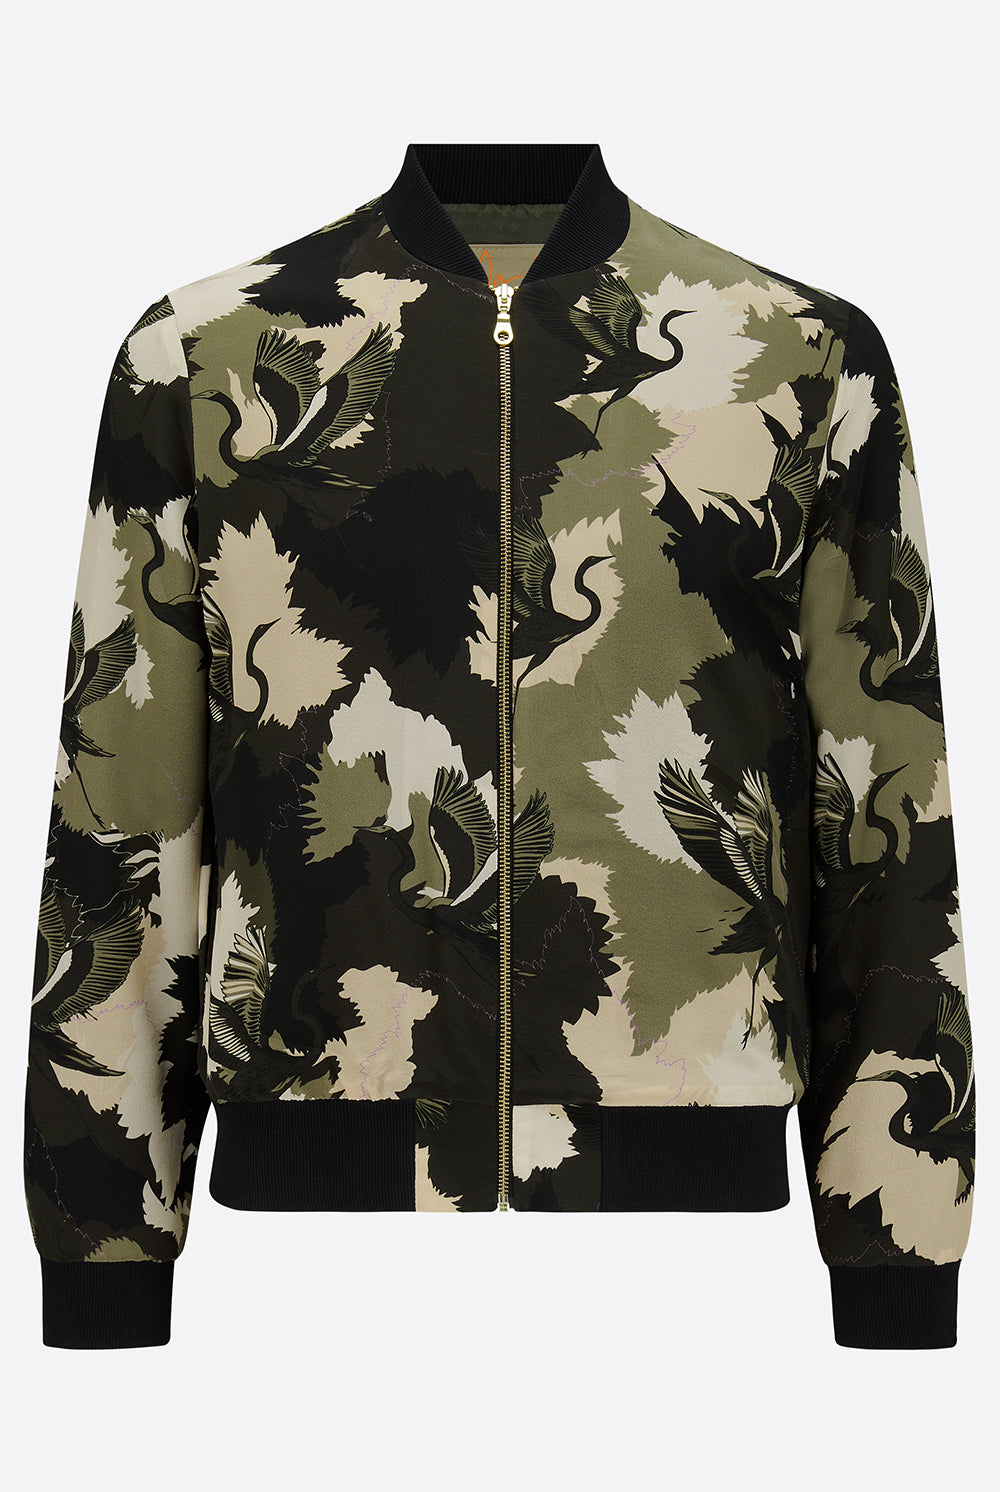 The front of a silk mens bomber jacket in a cream and green camouflage print with a stalk design